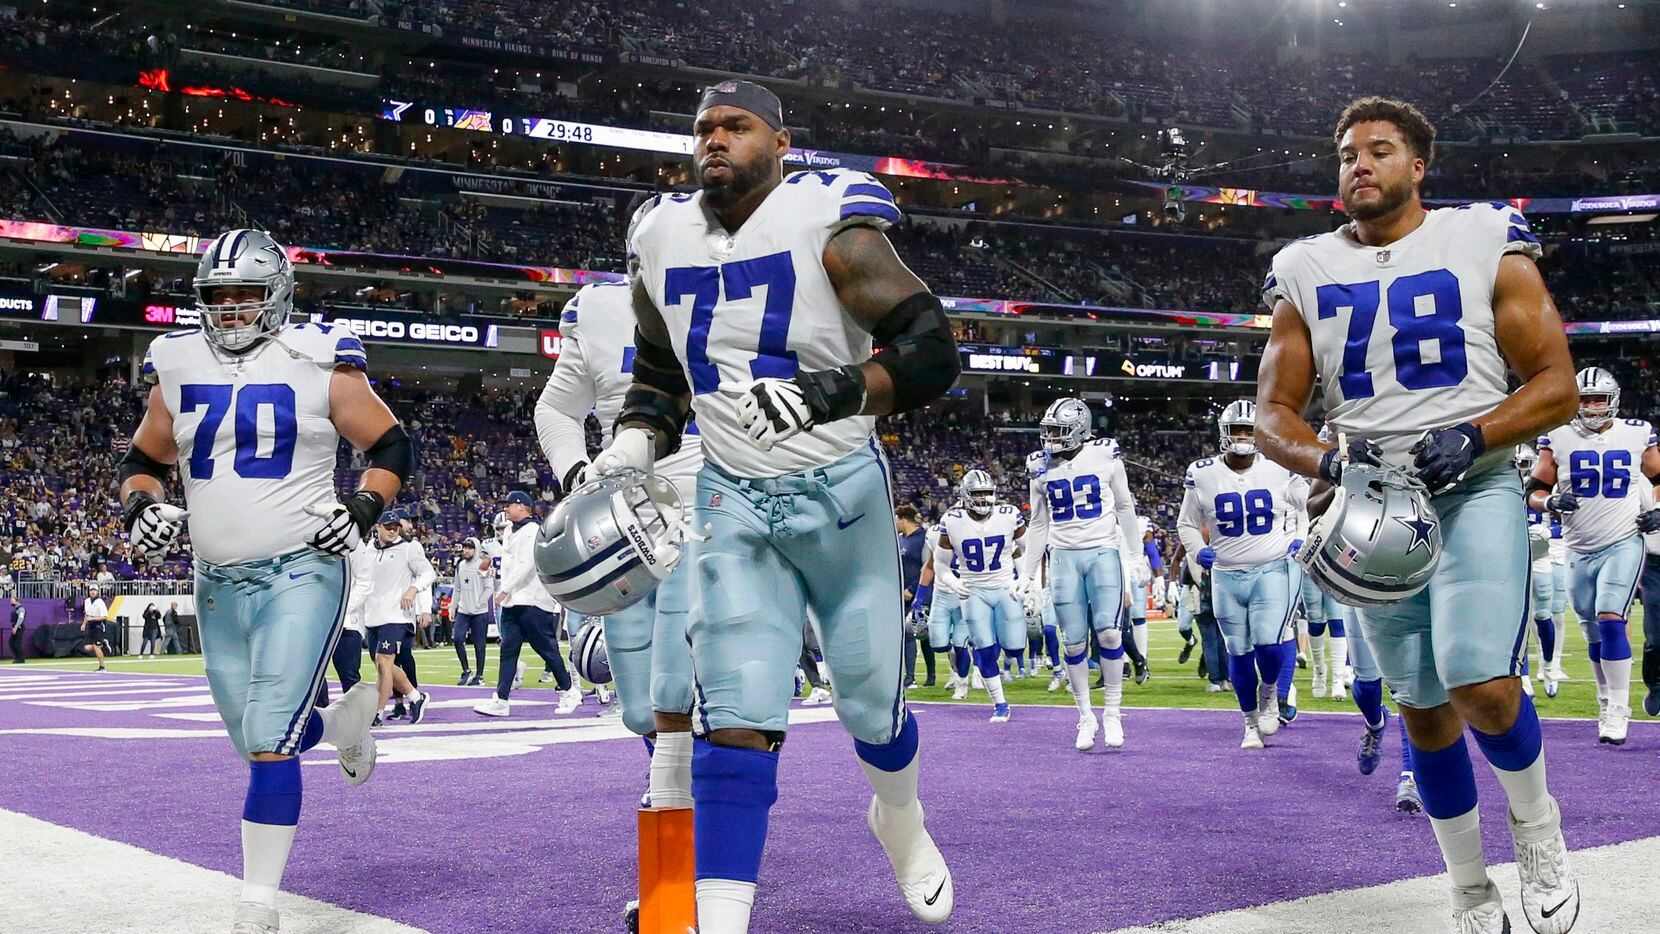 Dallas Cowboys offensive tackle Tyron Smith (77) jogs off the field with guard Zack Martin...